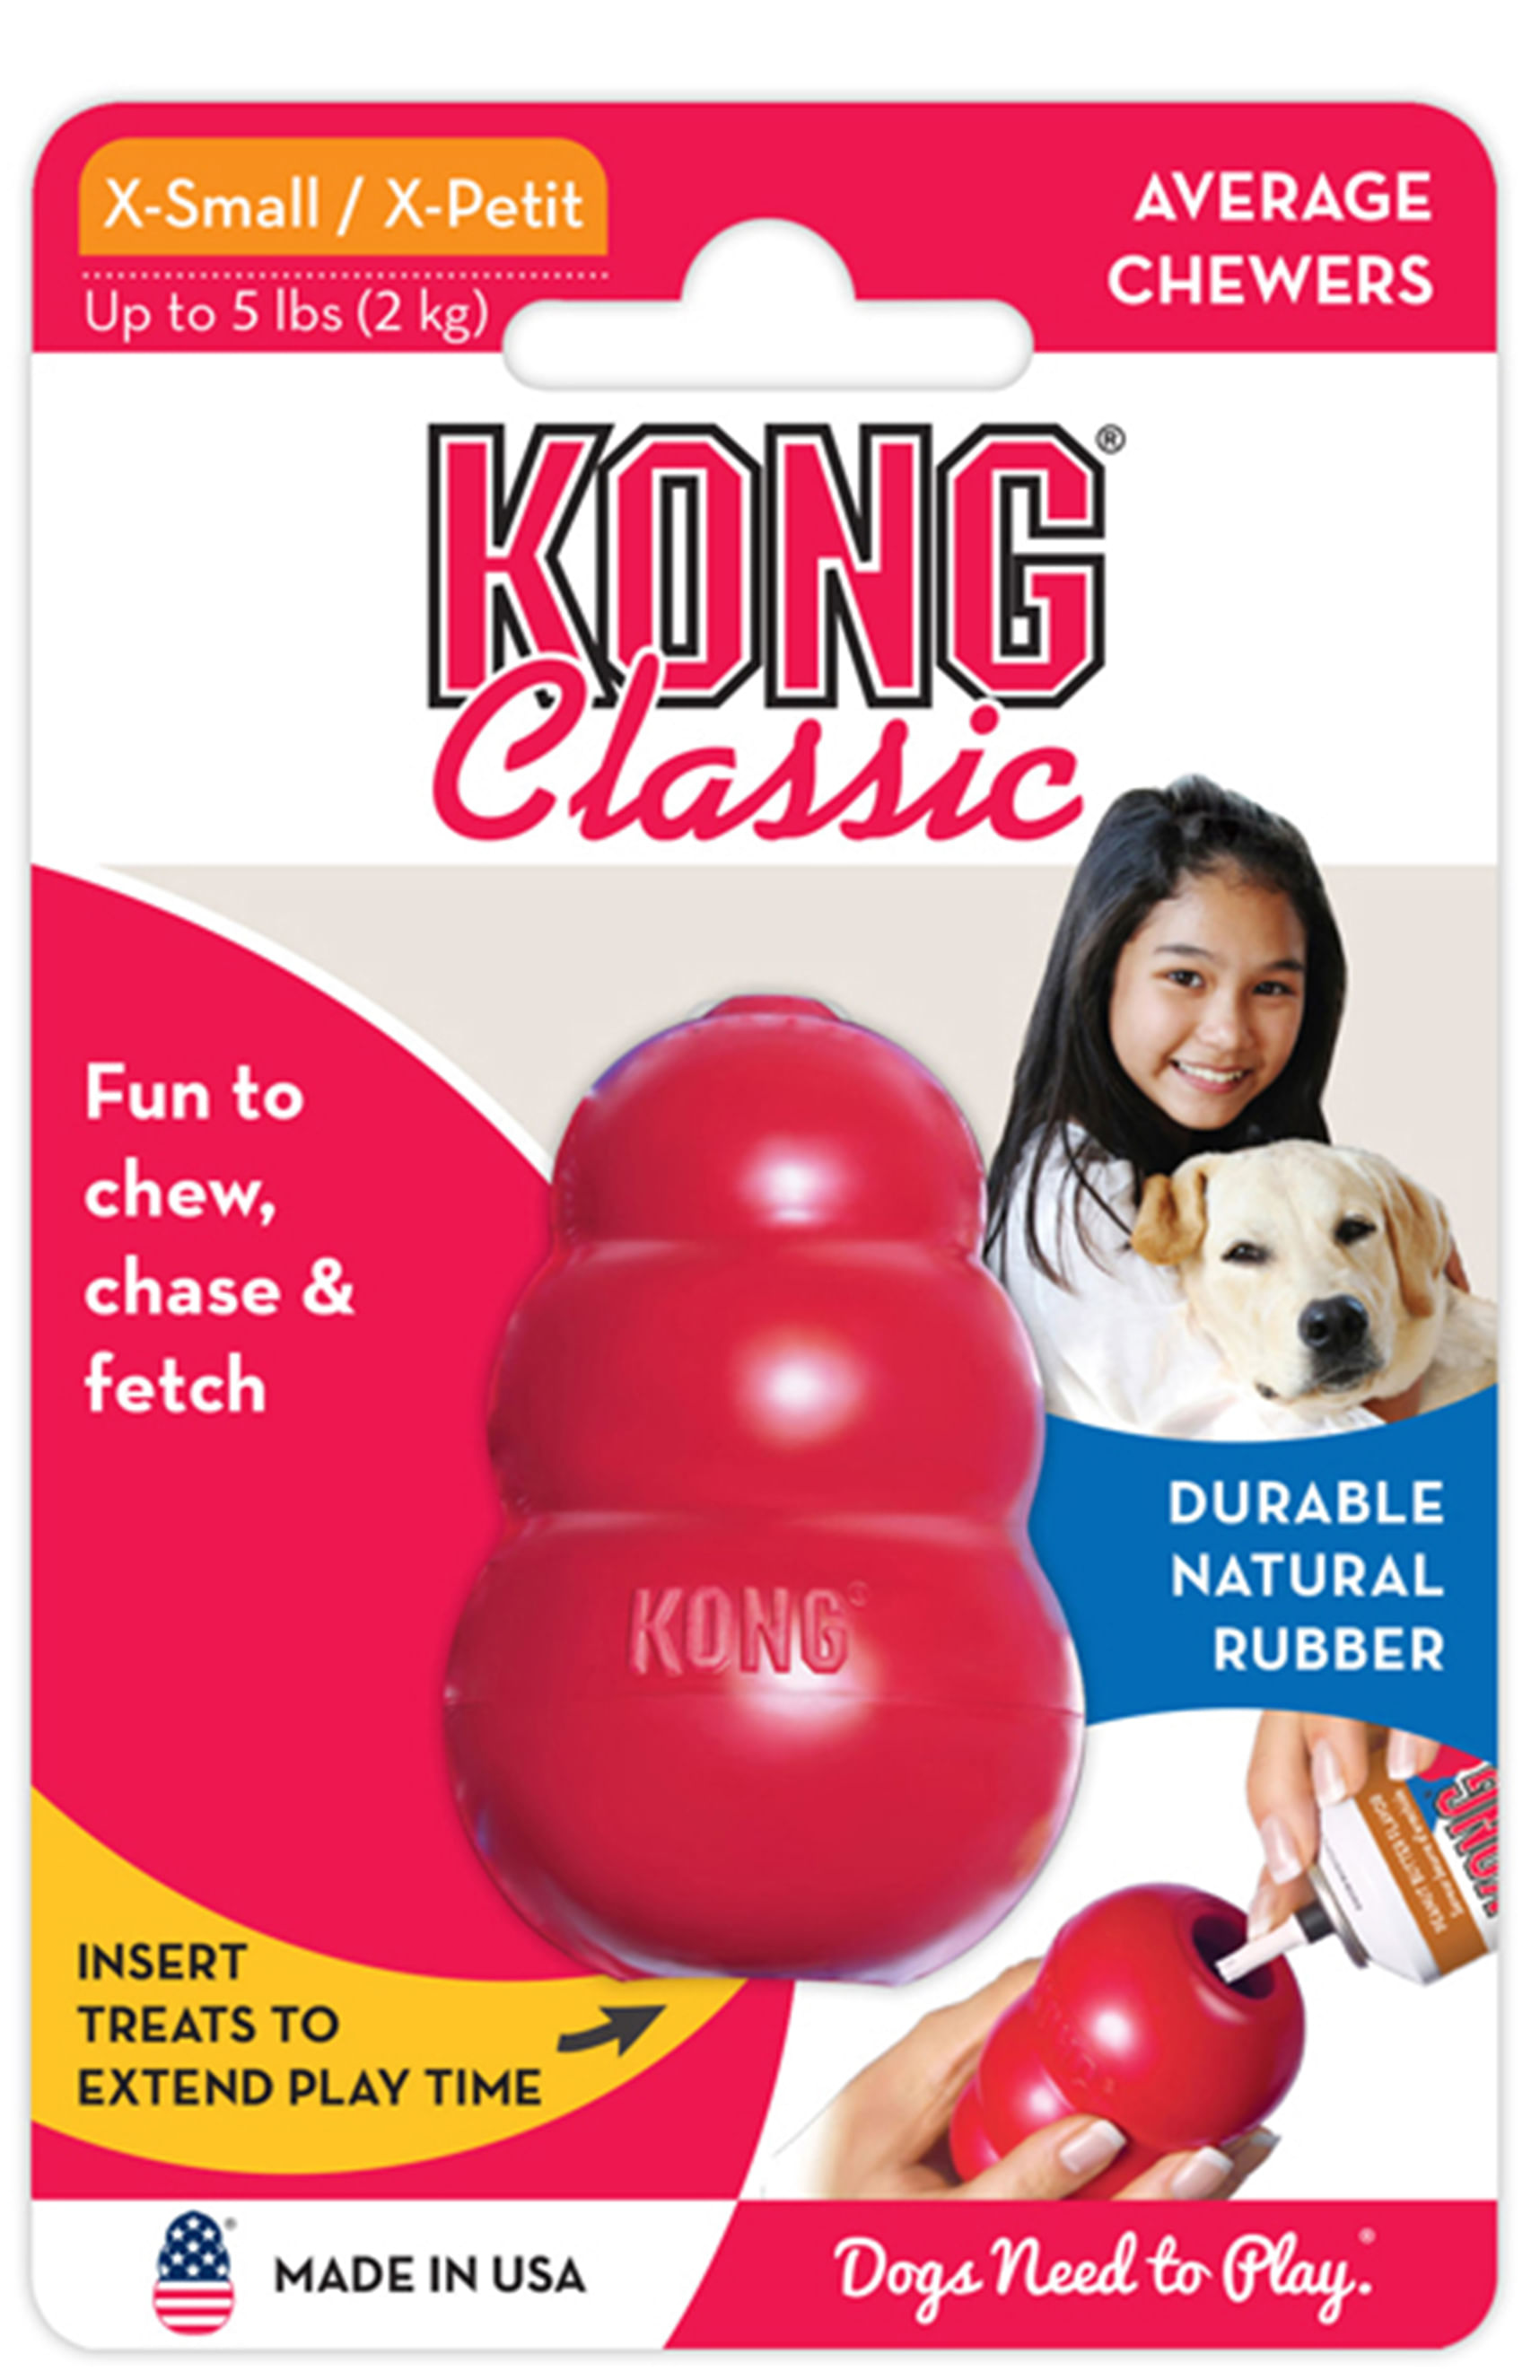 KONG Classic Dog Toy, X-Small